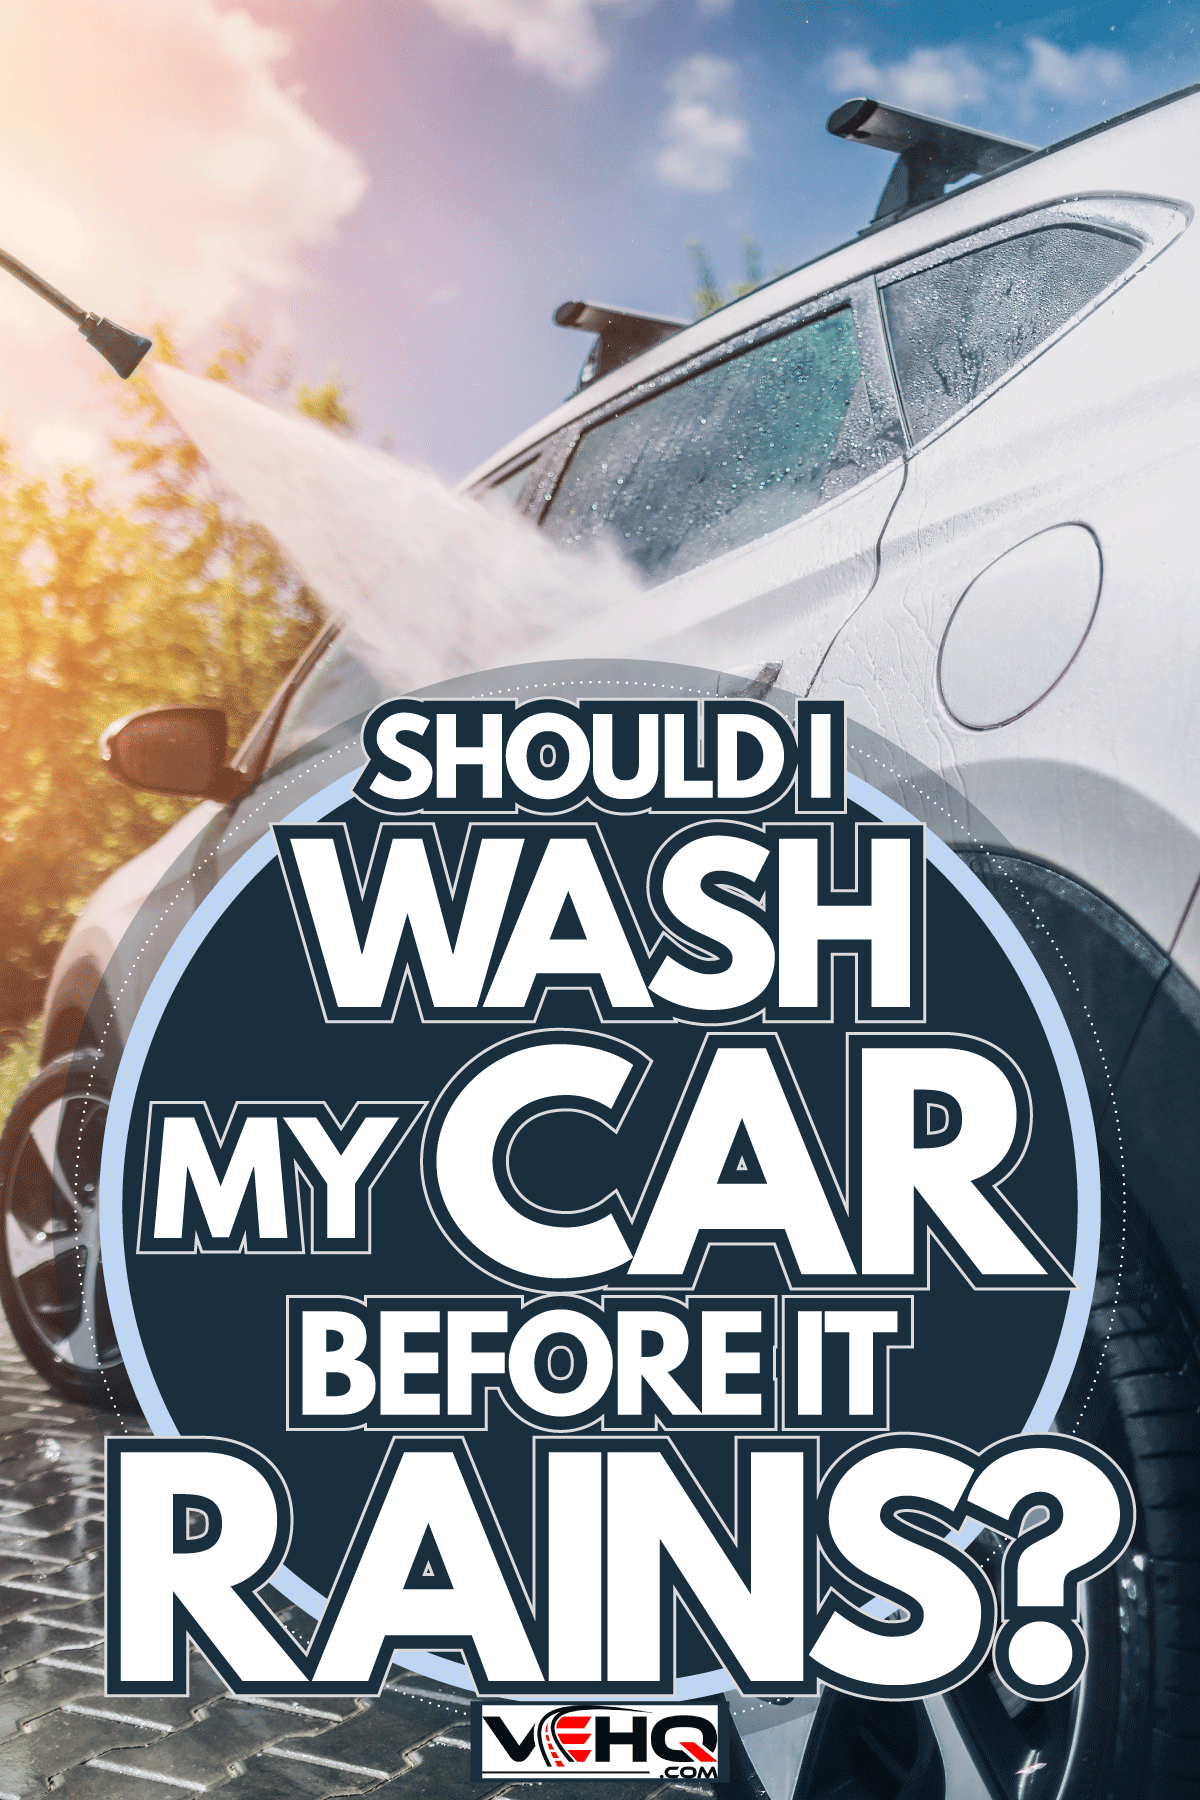 Manual car wash with pressurized water in car wash outside, Should I Wash My Car Before It Rains?